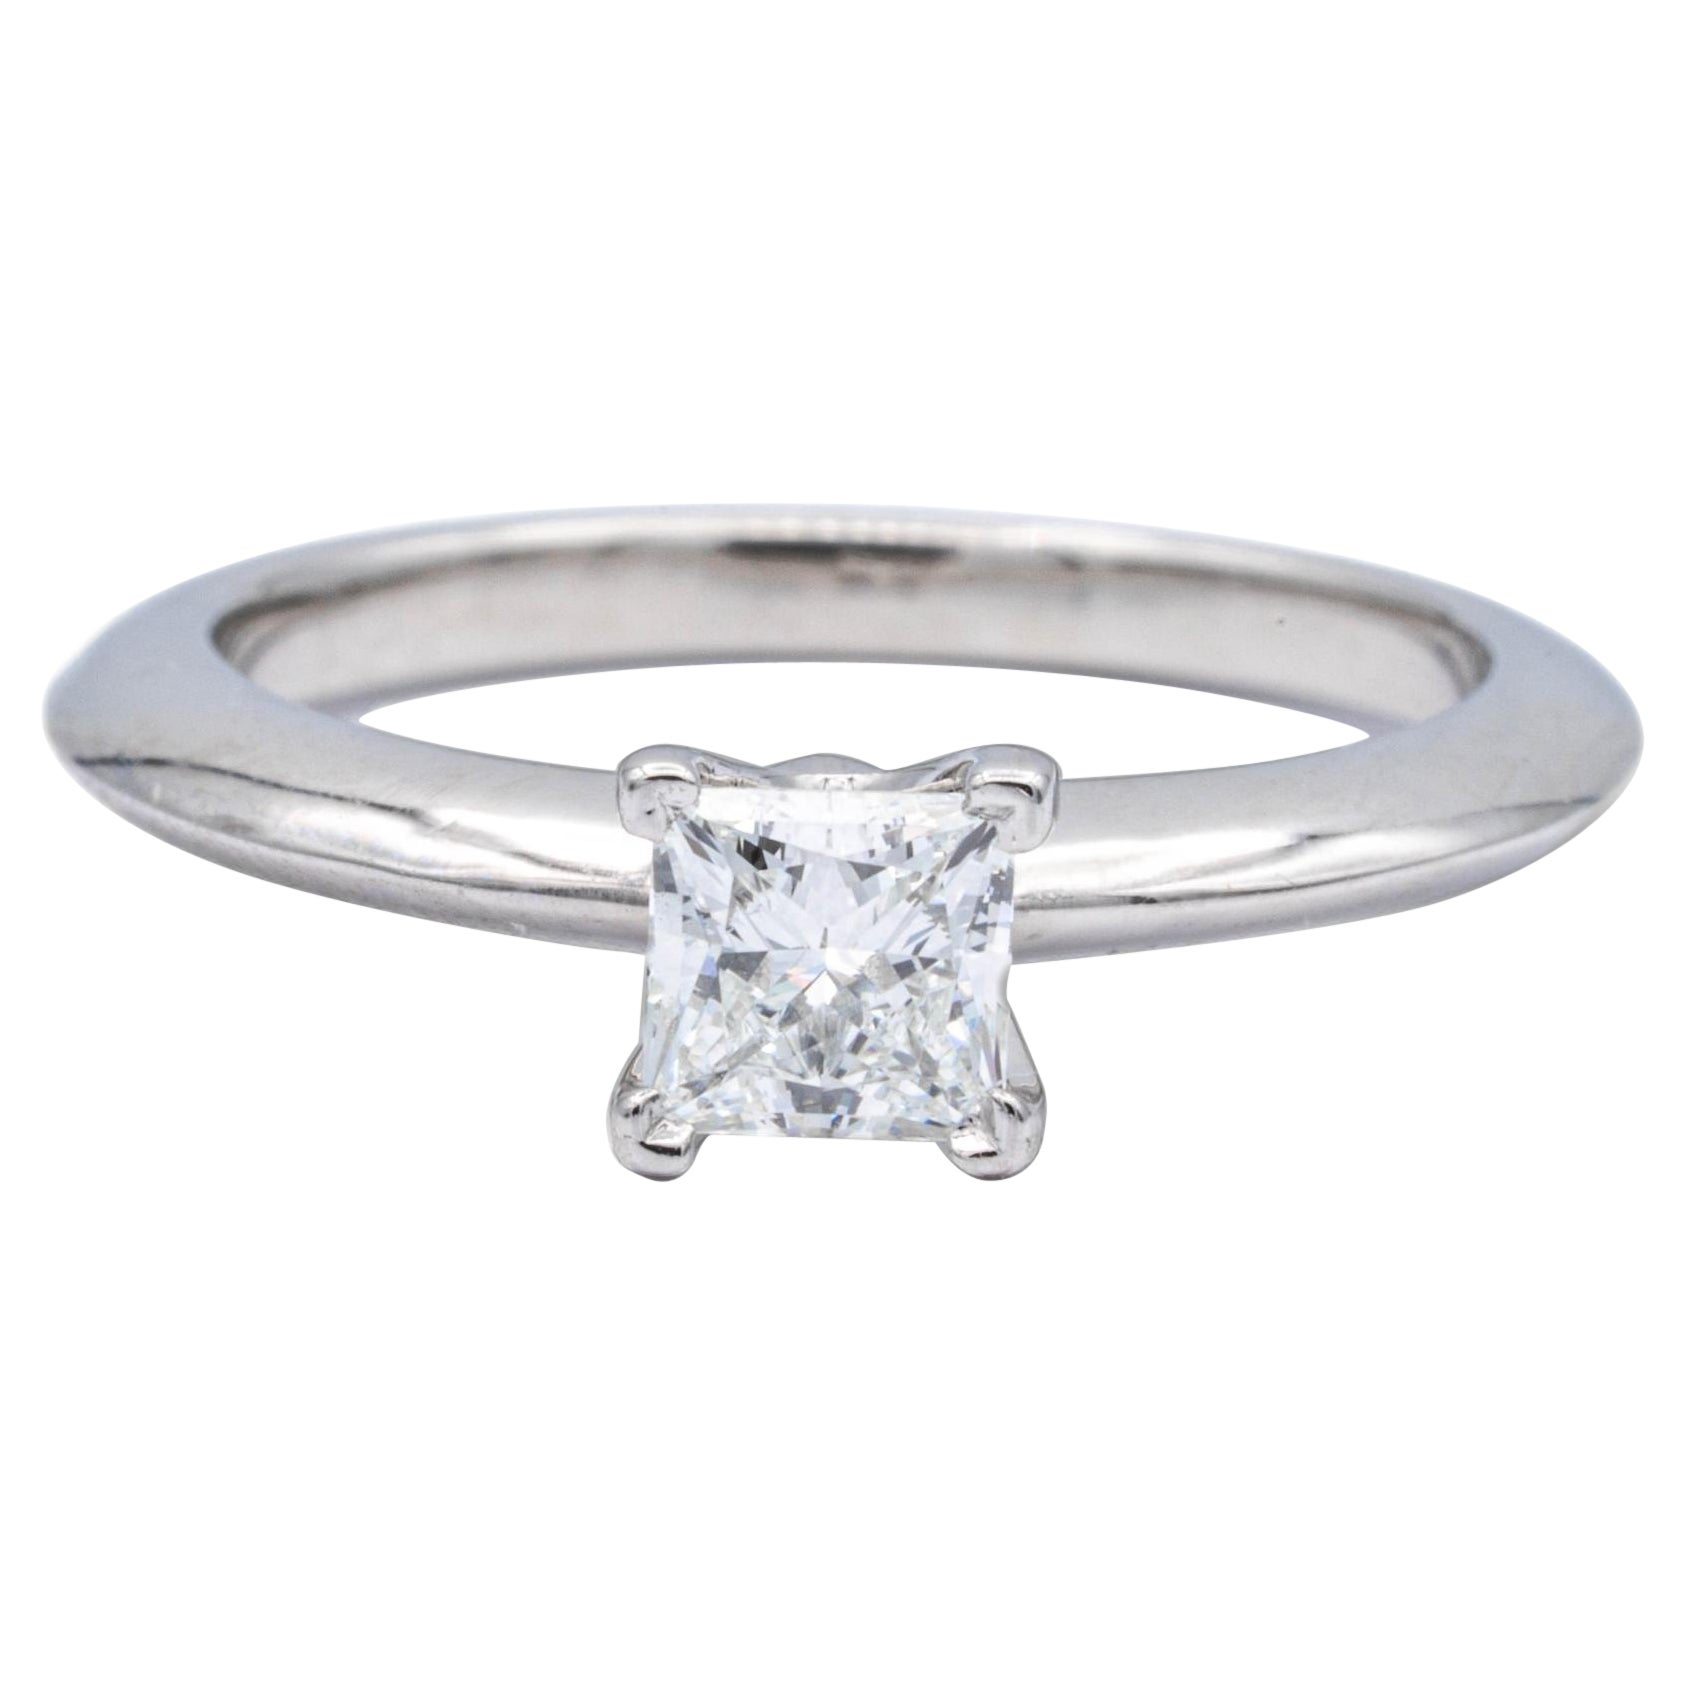 Tiffany & Co. Diamond Engagement Ring .38 Ct Princess Cut Solitaire GVS1 in Plat